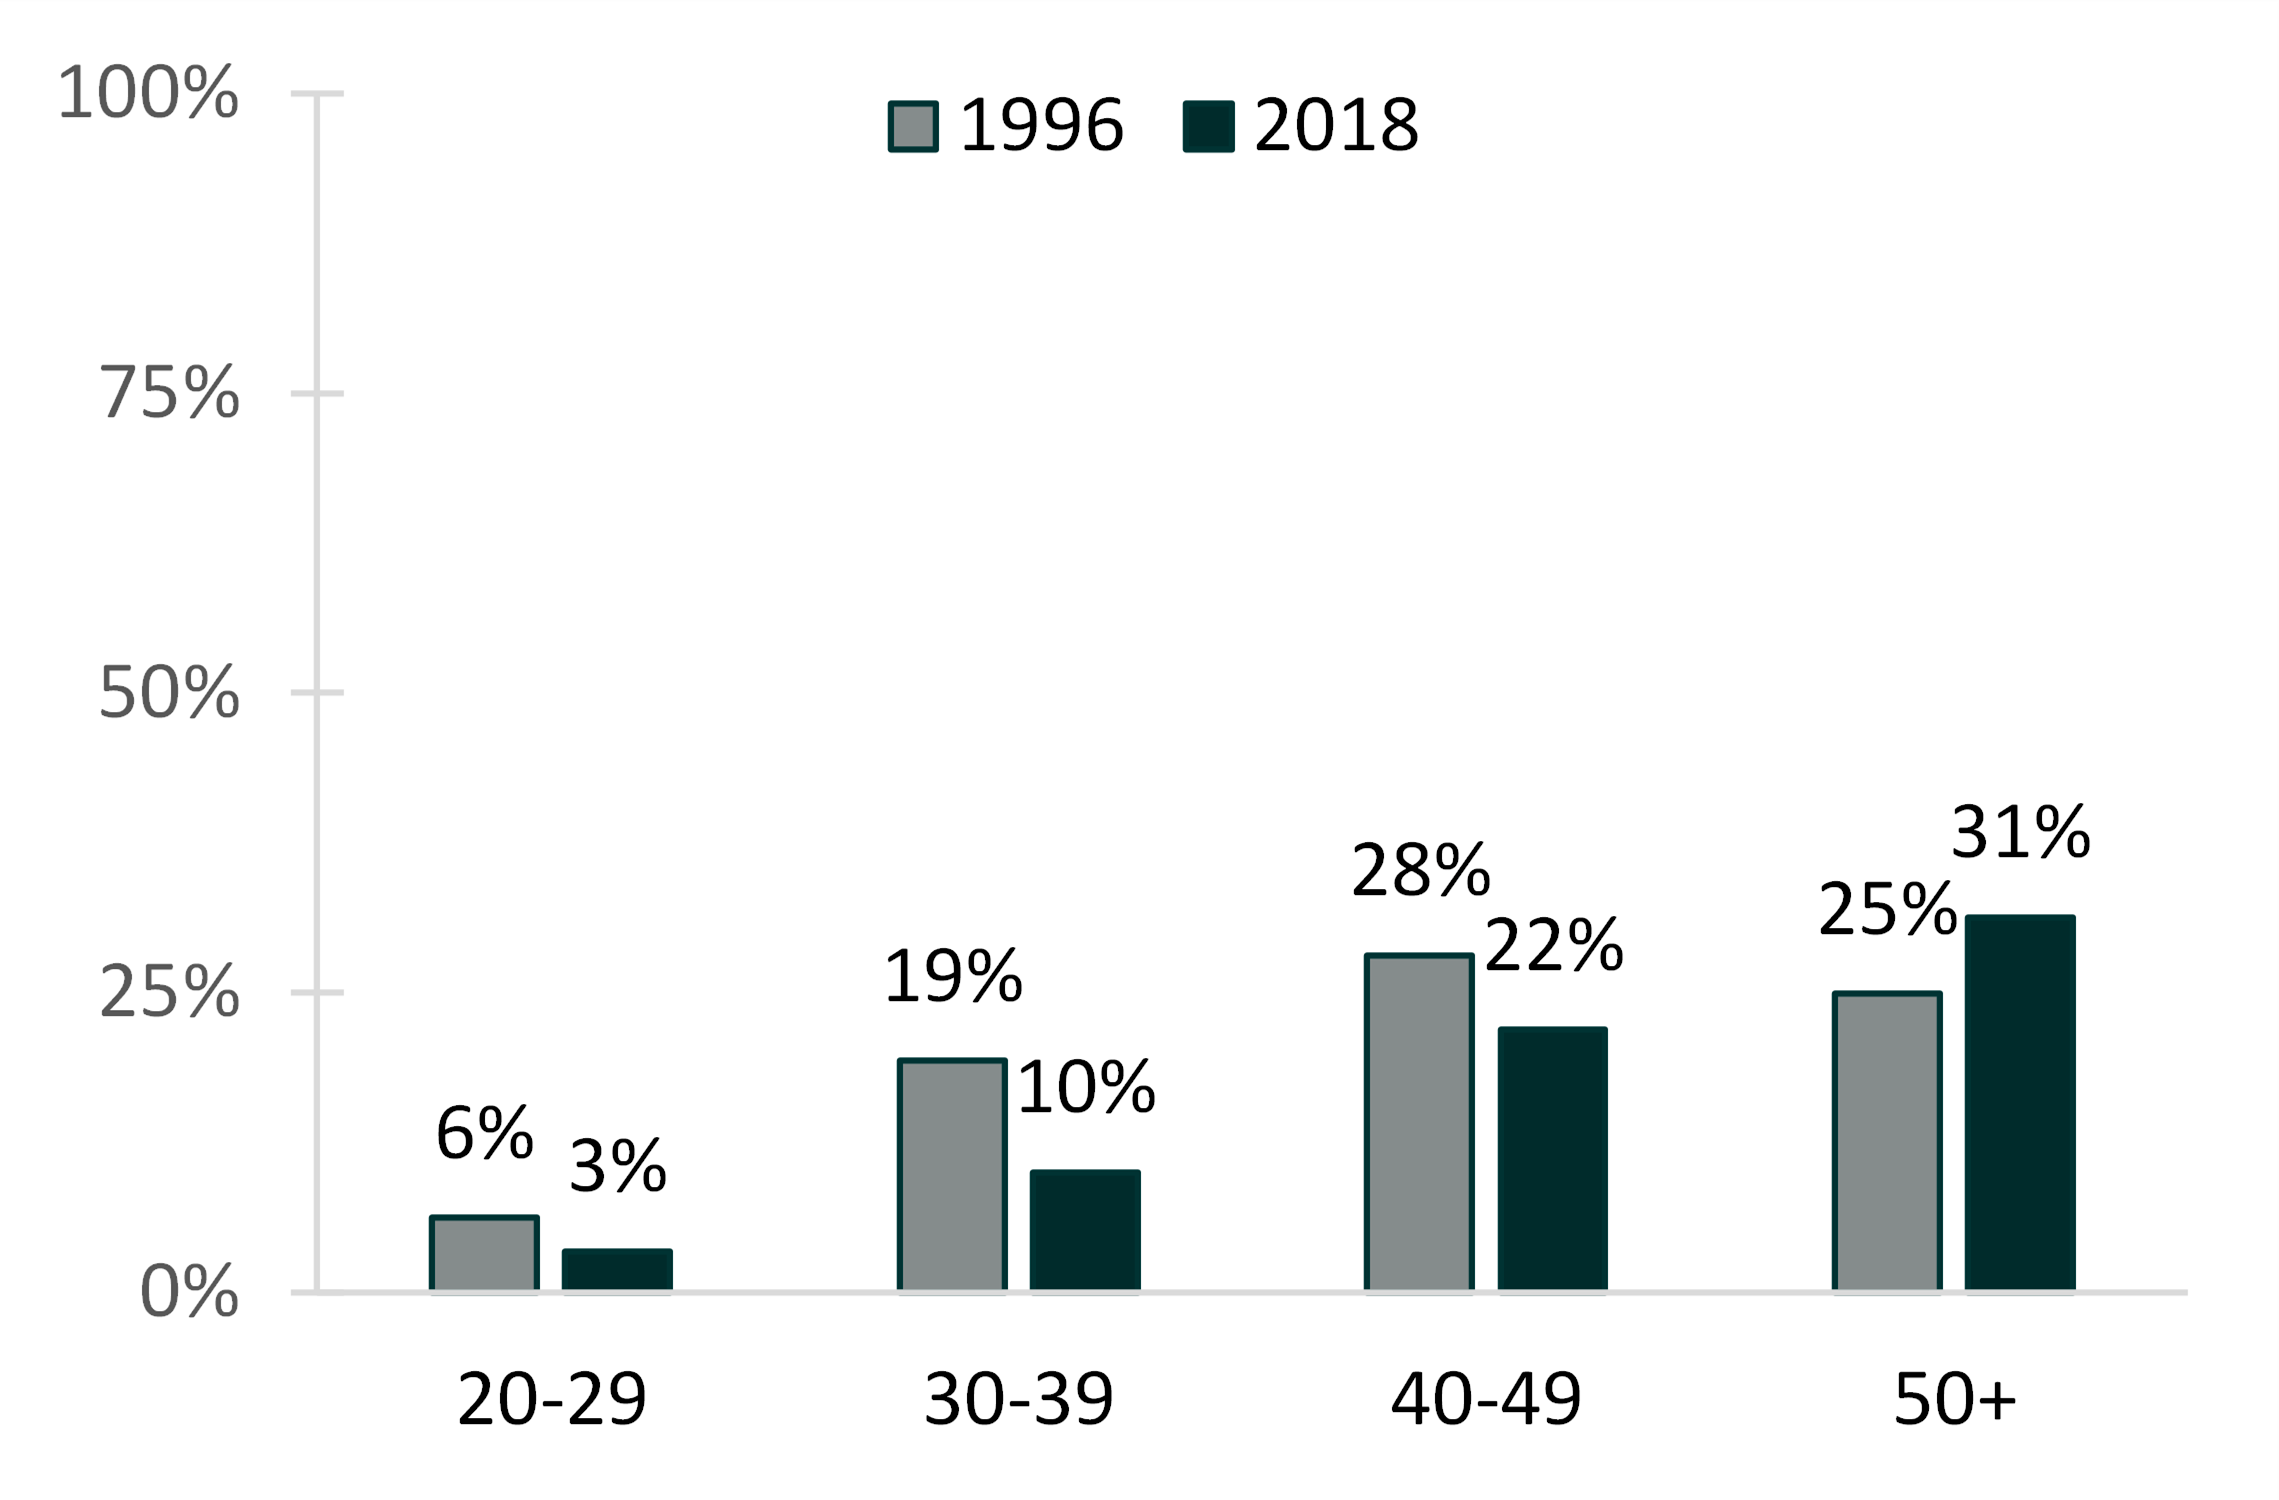 bar-graph-showing-percentage-ever-remarried-by-age-group-1996-&-2018